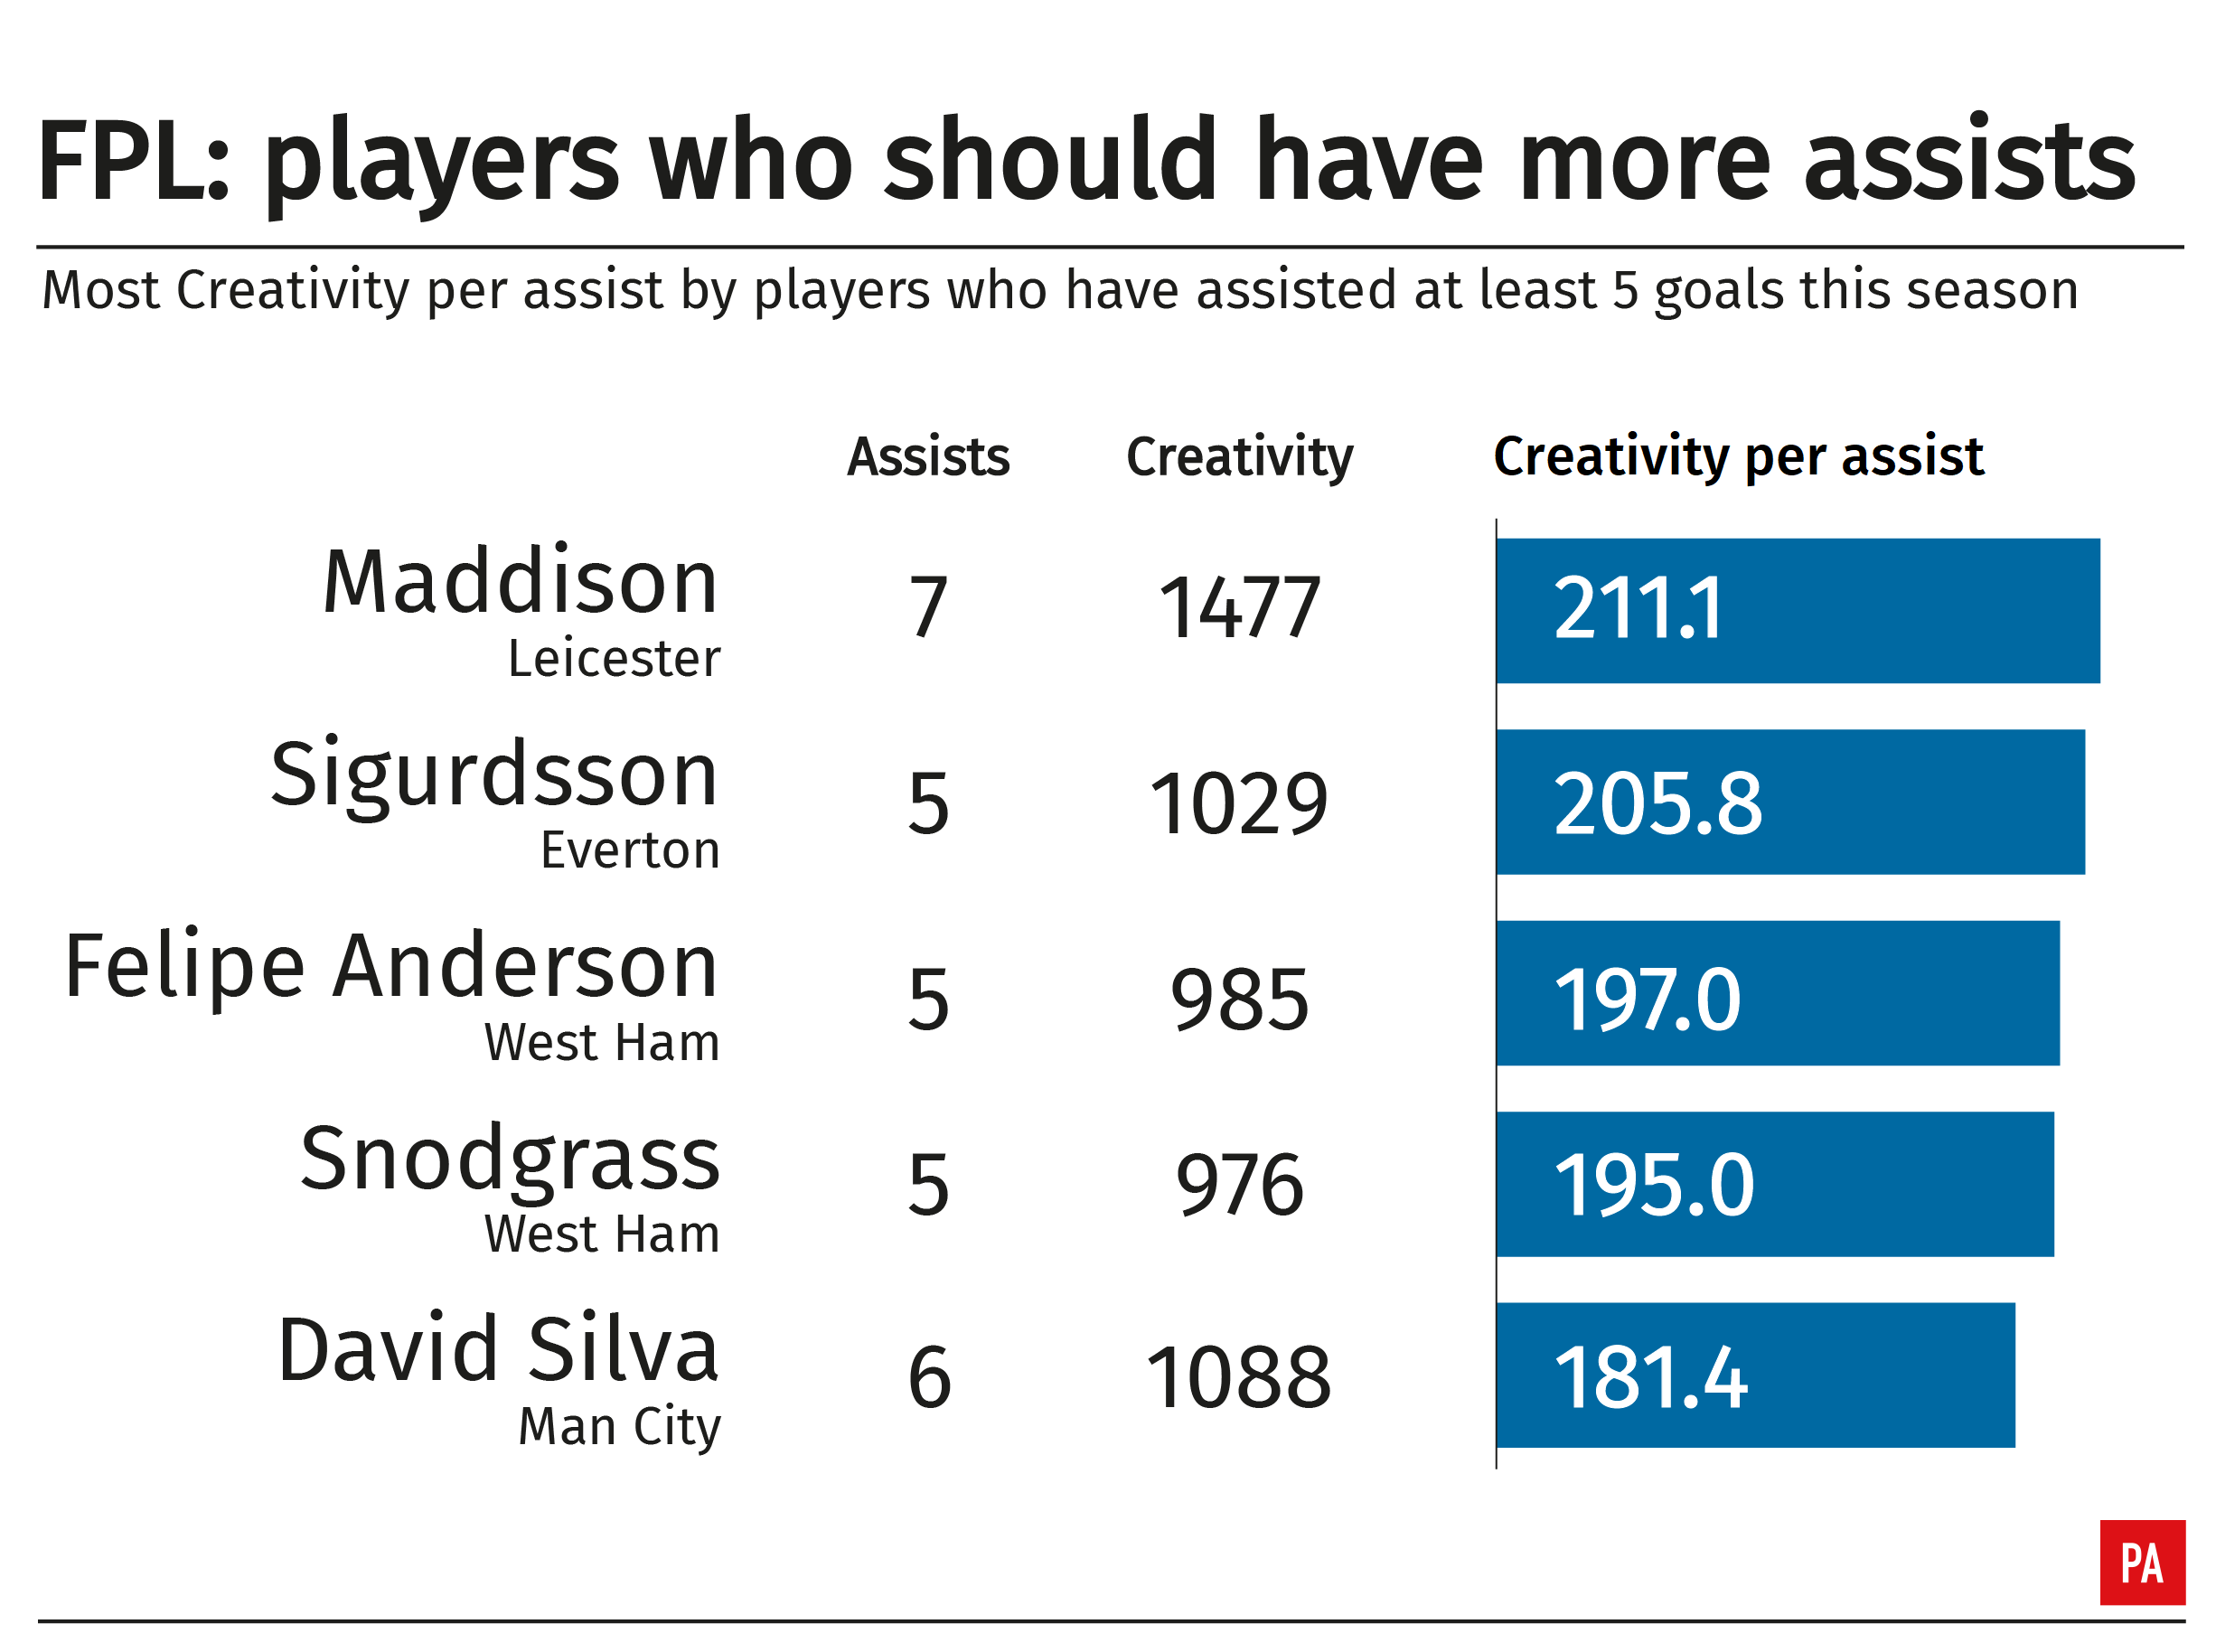 A table showing Premier League footballers who should have more assists